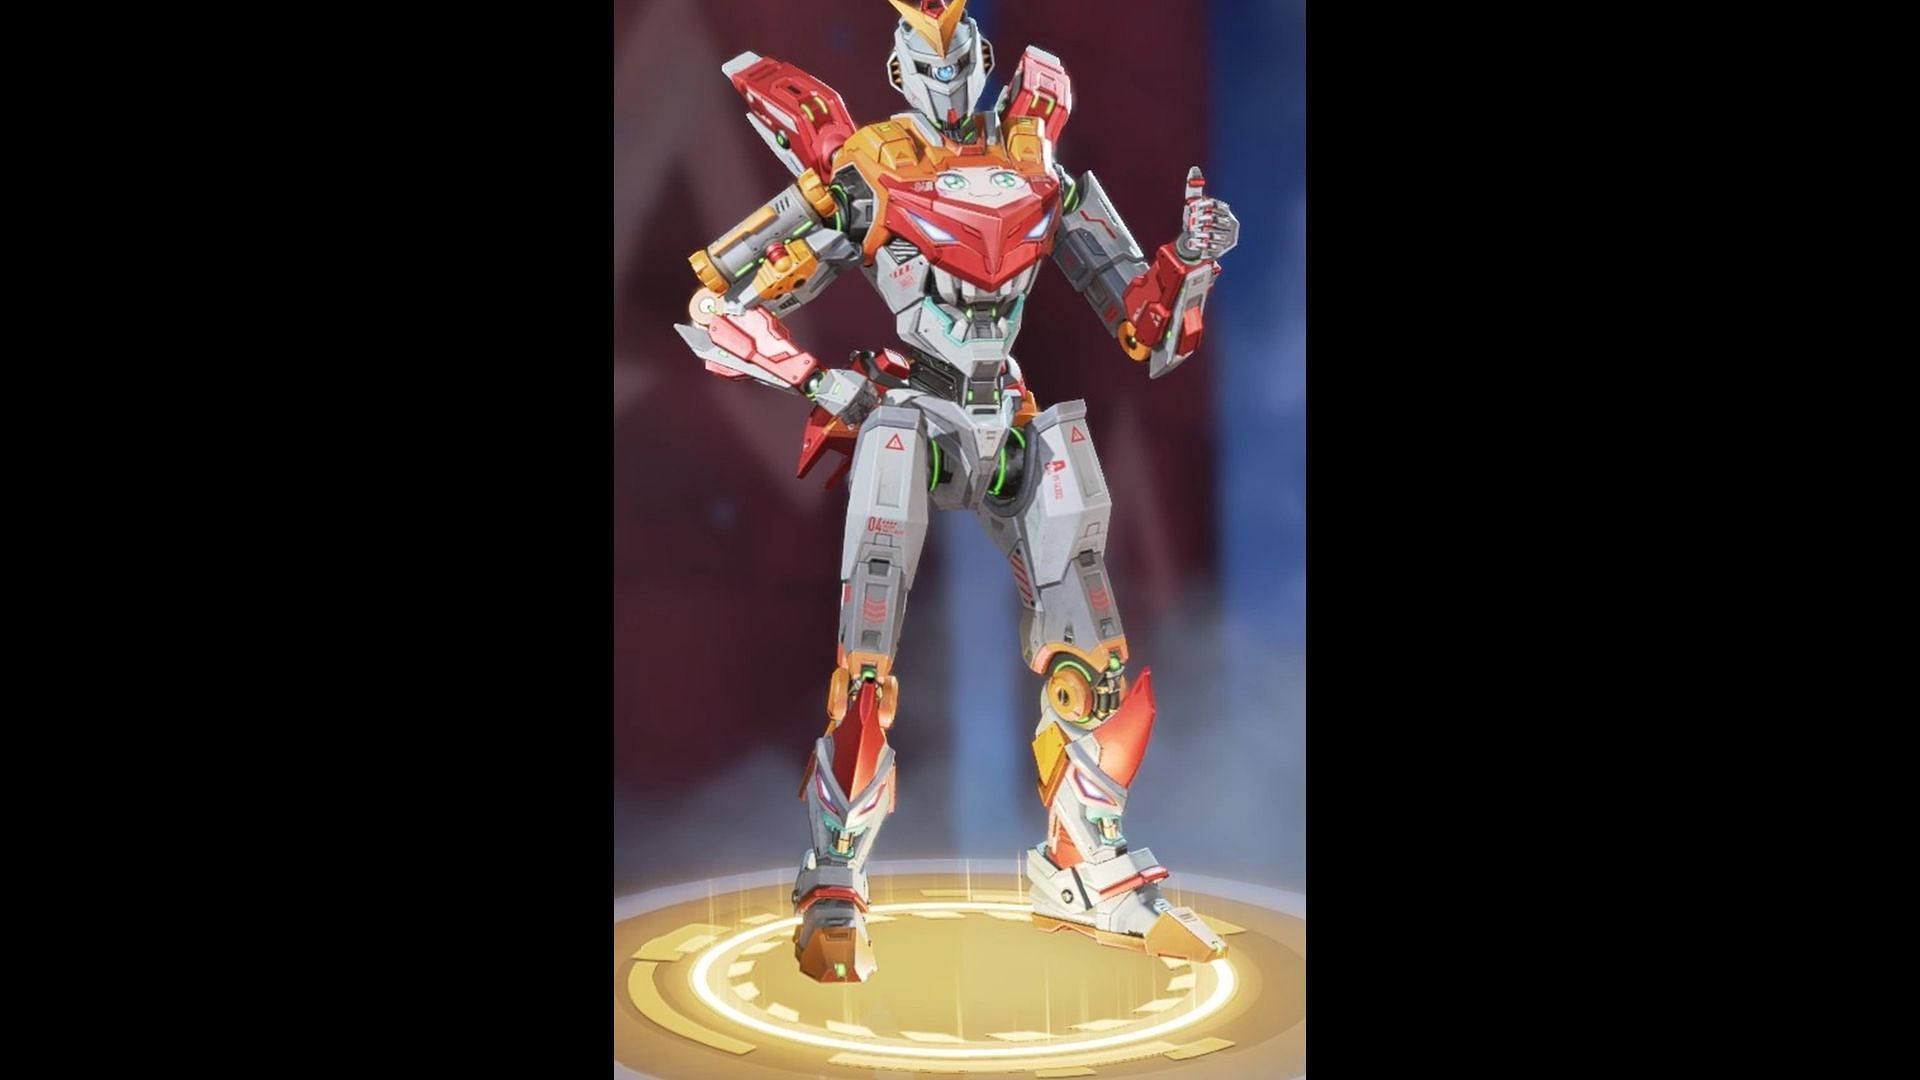 MECHAMRVN is one of the best Pathfinder skins in Apex Legends (Image via Electronic Arts)